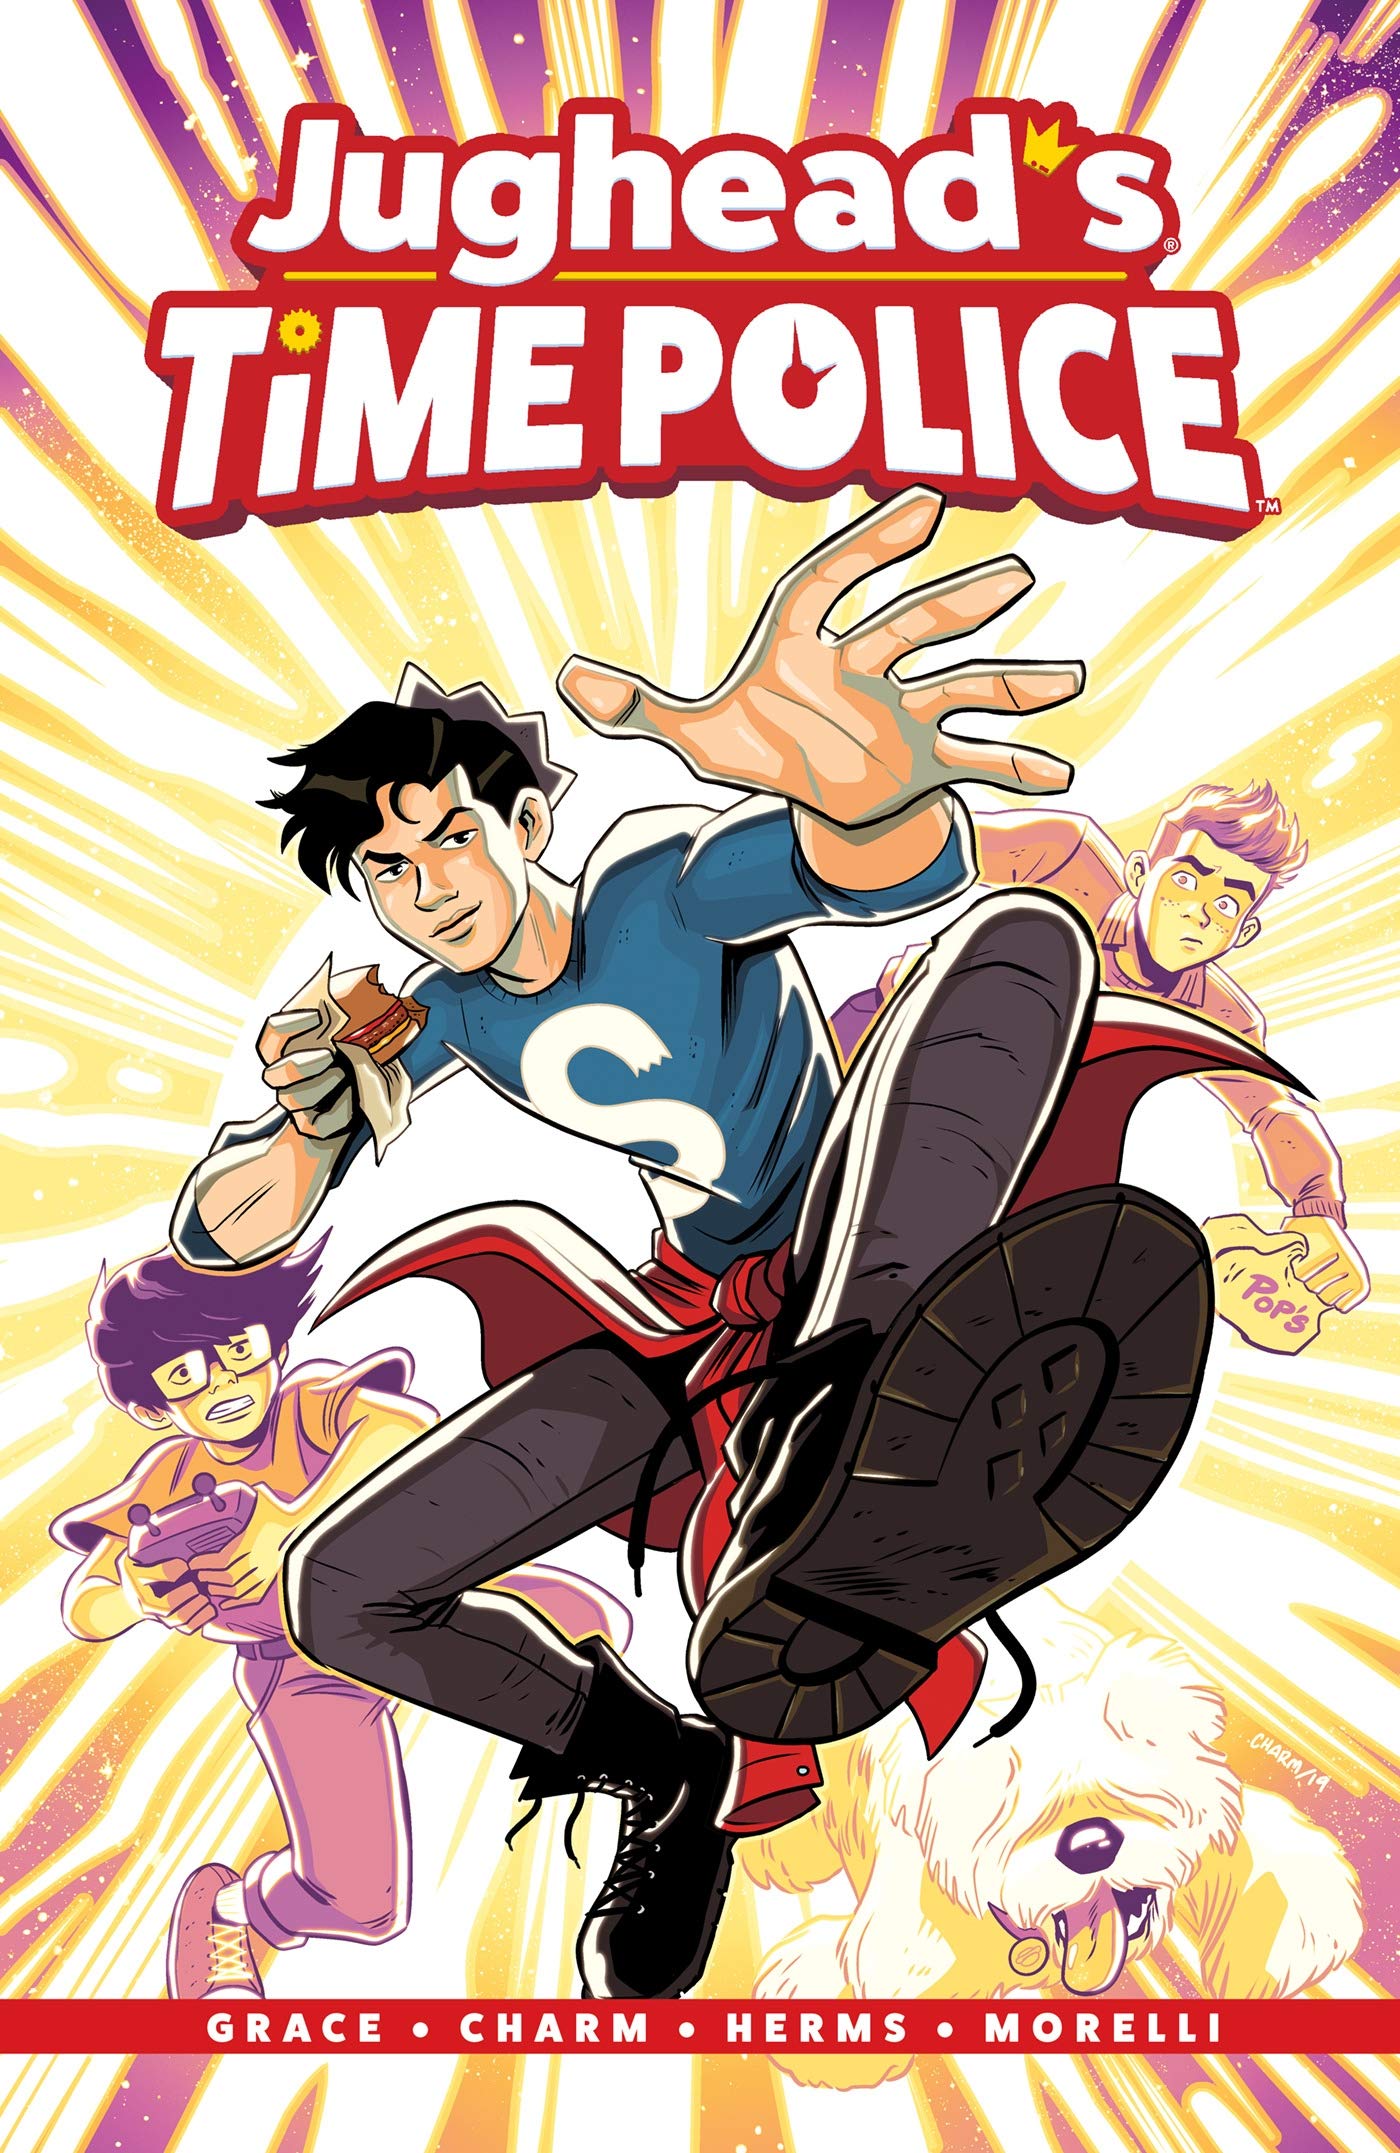 title of Jughead's time police